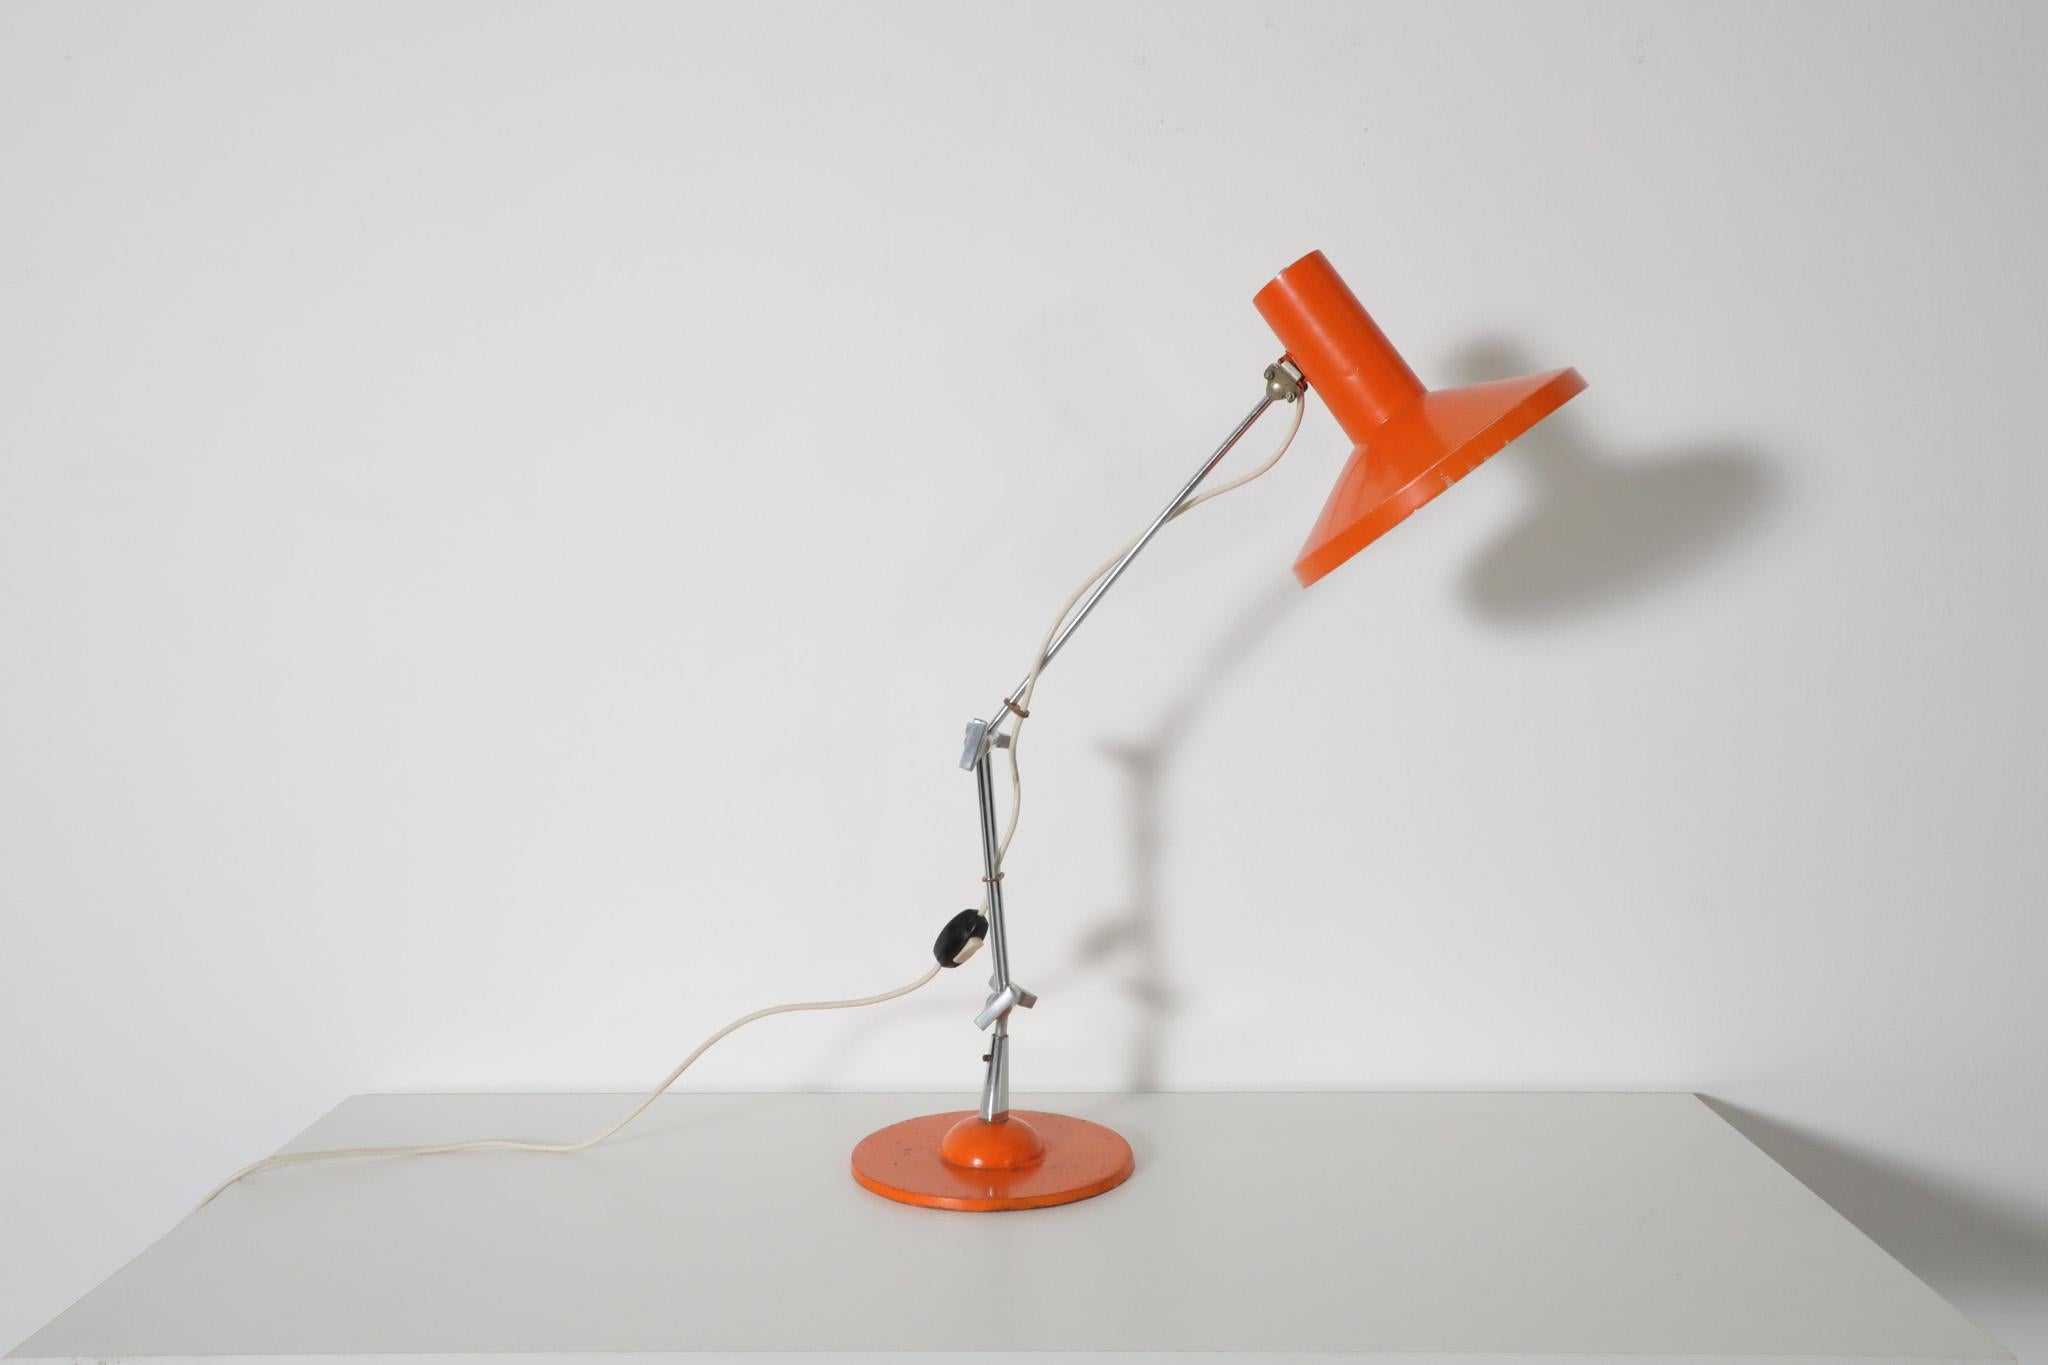 Mid-Century, multi-adjustable drafting table lamp with heavy metal base. Industrial architecture lamp with chrome stem and steel knobs for height and directional light adjustments. A stylish orange enameled table lamp perfect for a studio space or a